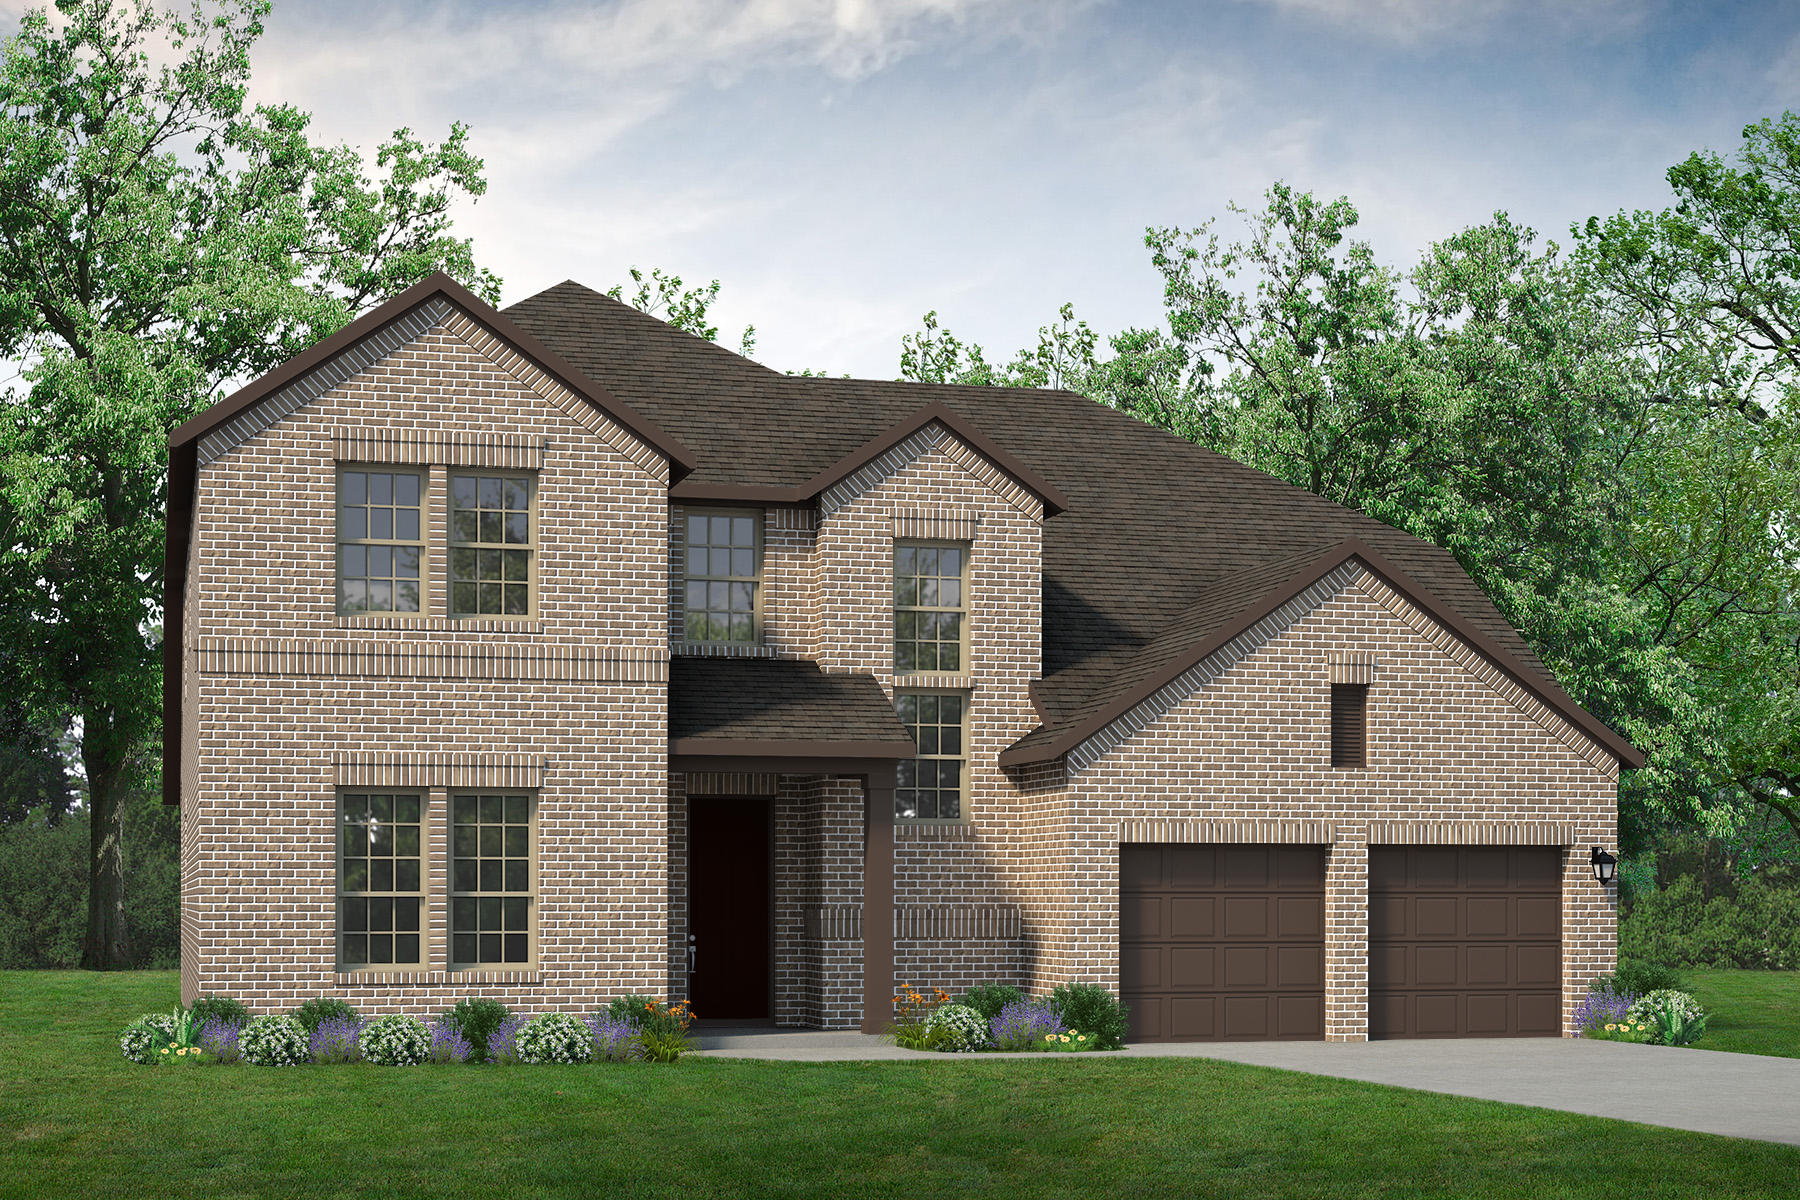 A rendering of a two story brick home.